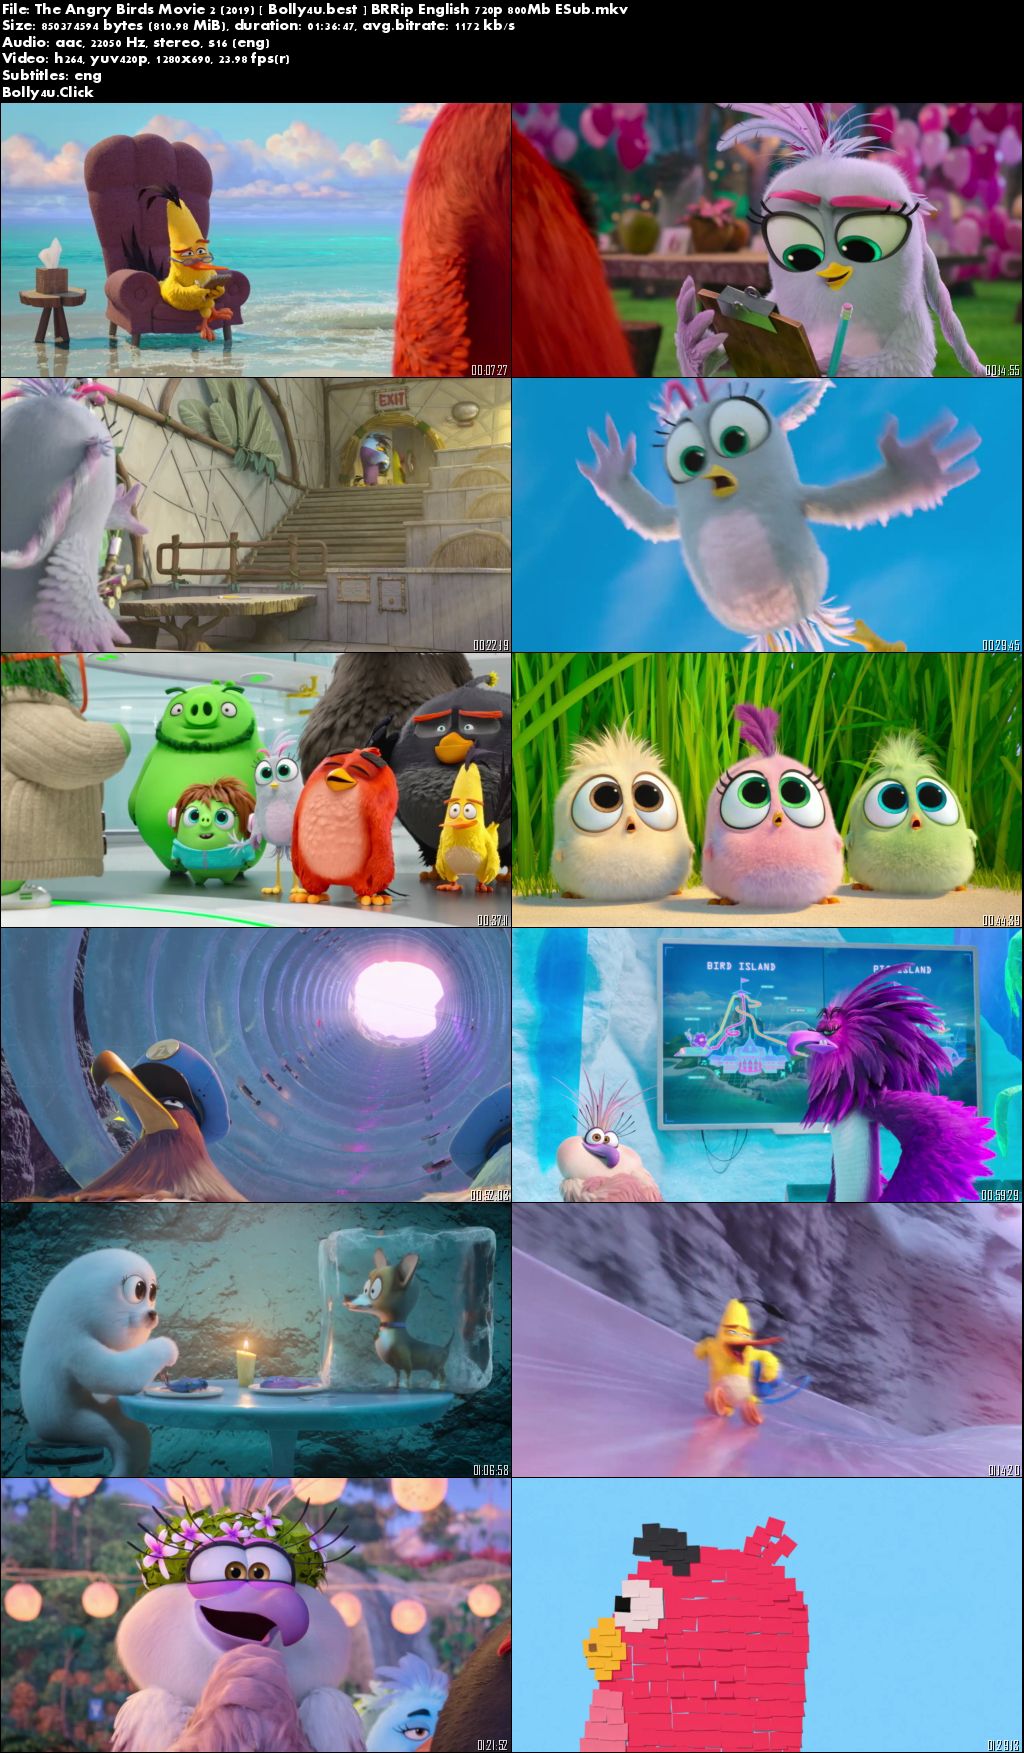 The Angry Birds Movie 2 2019 BRRip 300Mb English 480p ESub Download